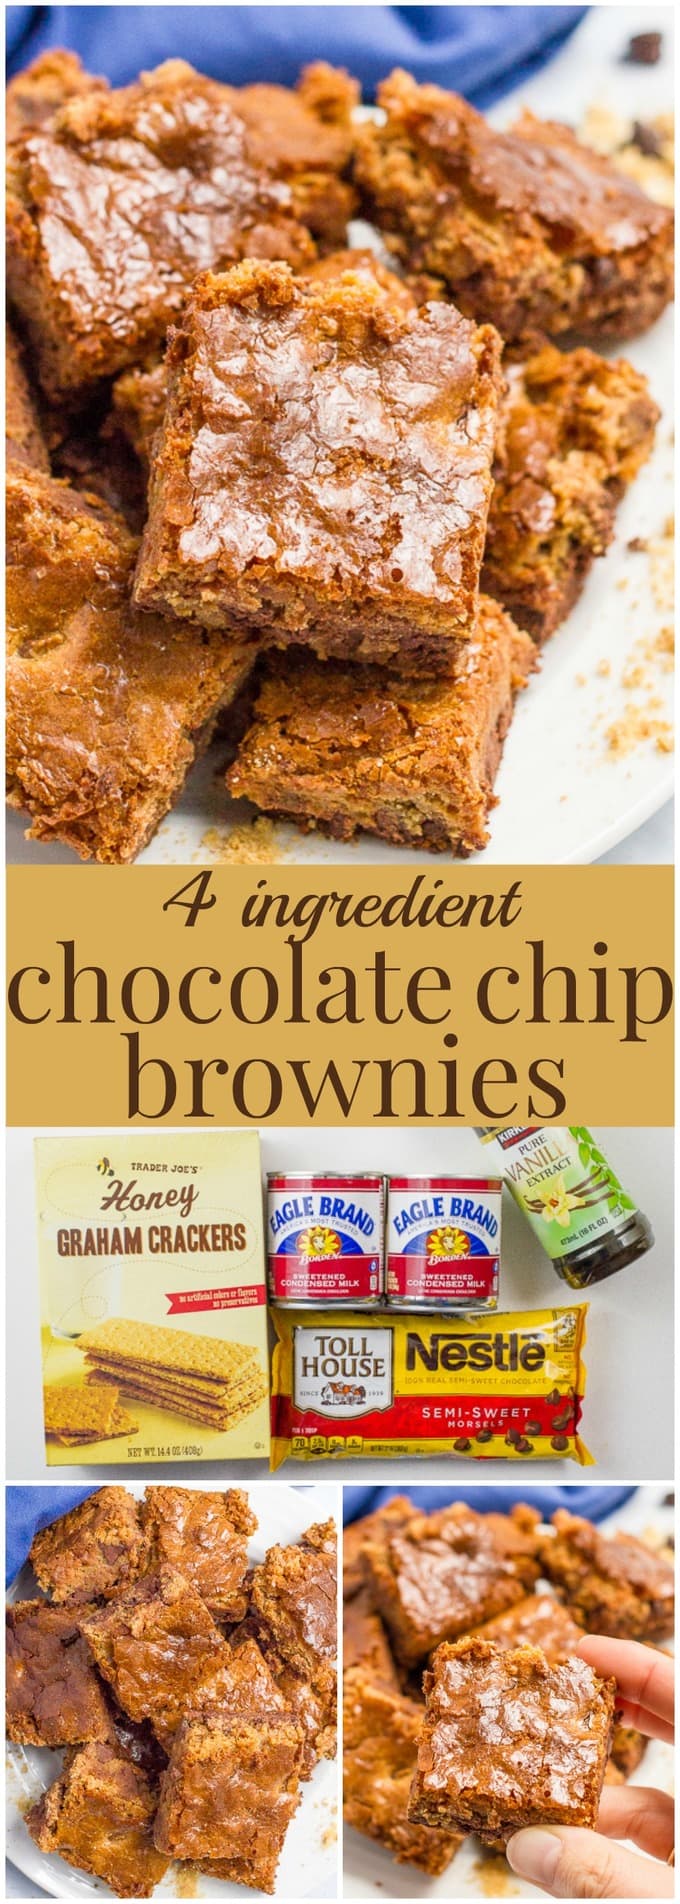 Chocolate chip brownies have just 4 ingredients (no box mixes) and come out chewy and perfectly sweet - a great, easy dessert! | www.familyfoodonthetable.com